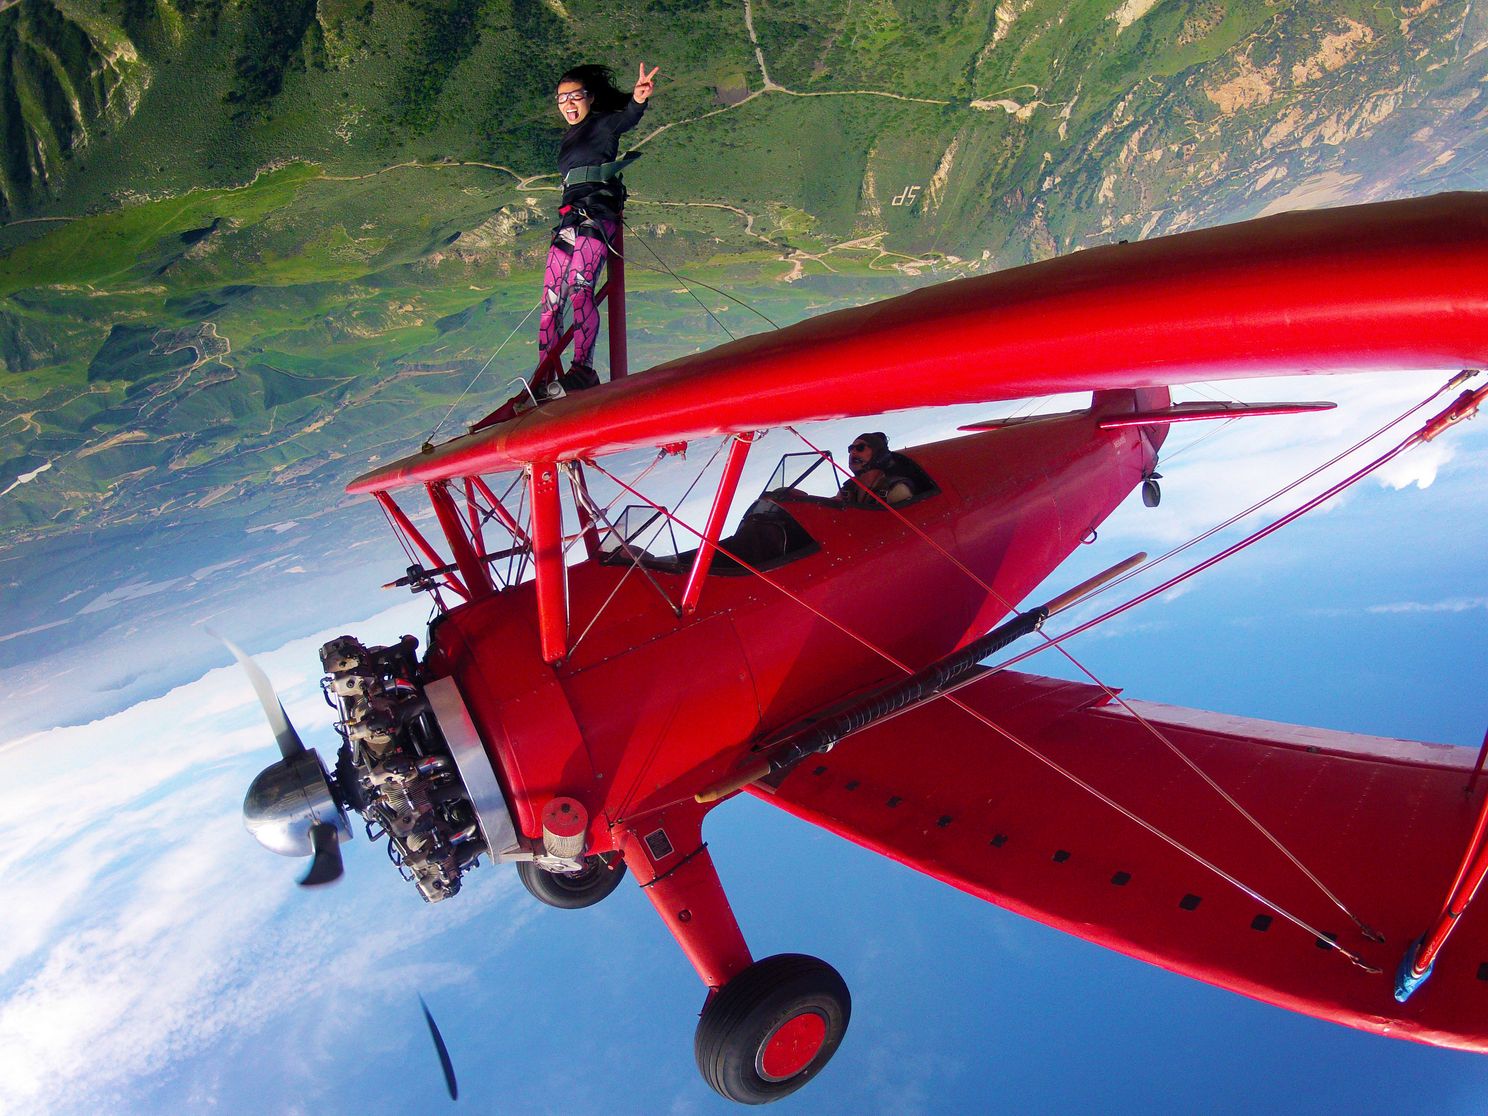 a person standing on top of a red biplane flying upside down